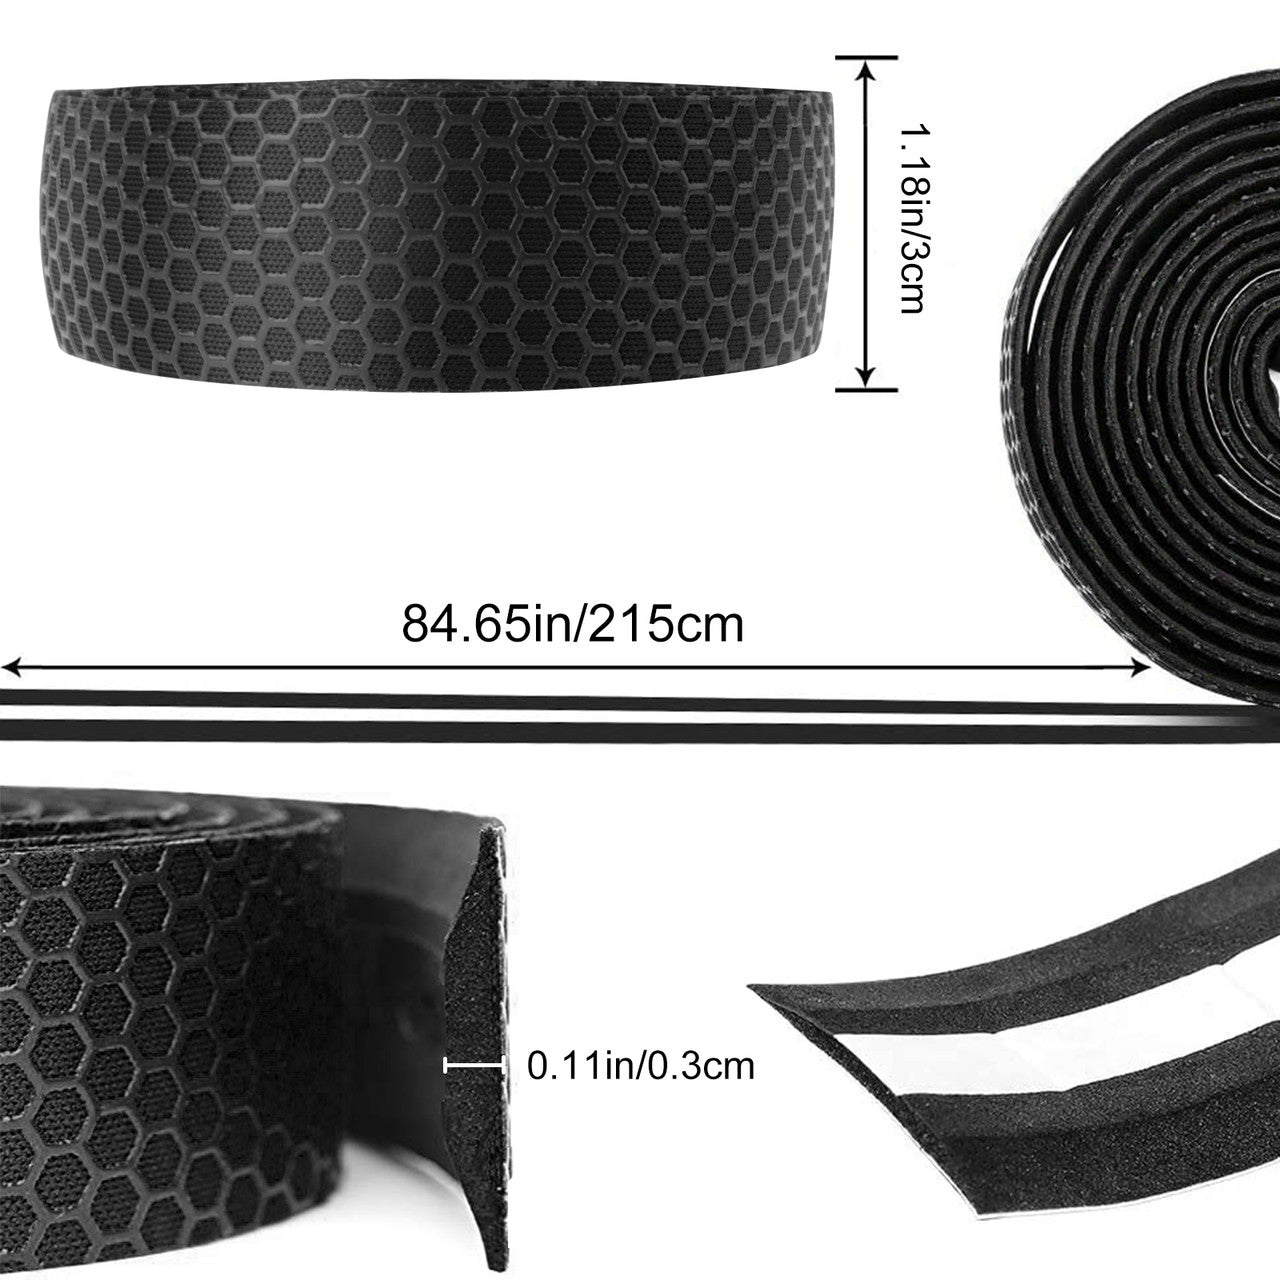 Honeycomb Silicone Handle for Bicycles with Quick Drying Characteristics, Black